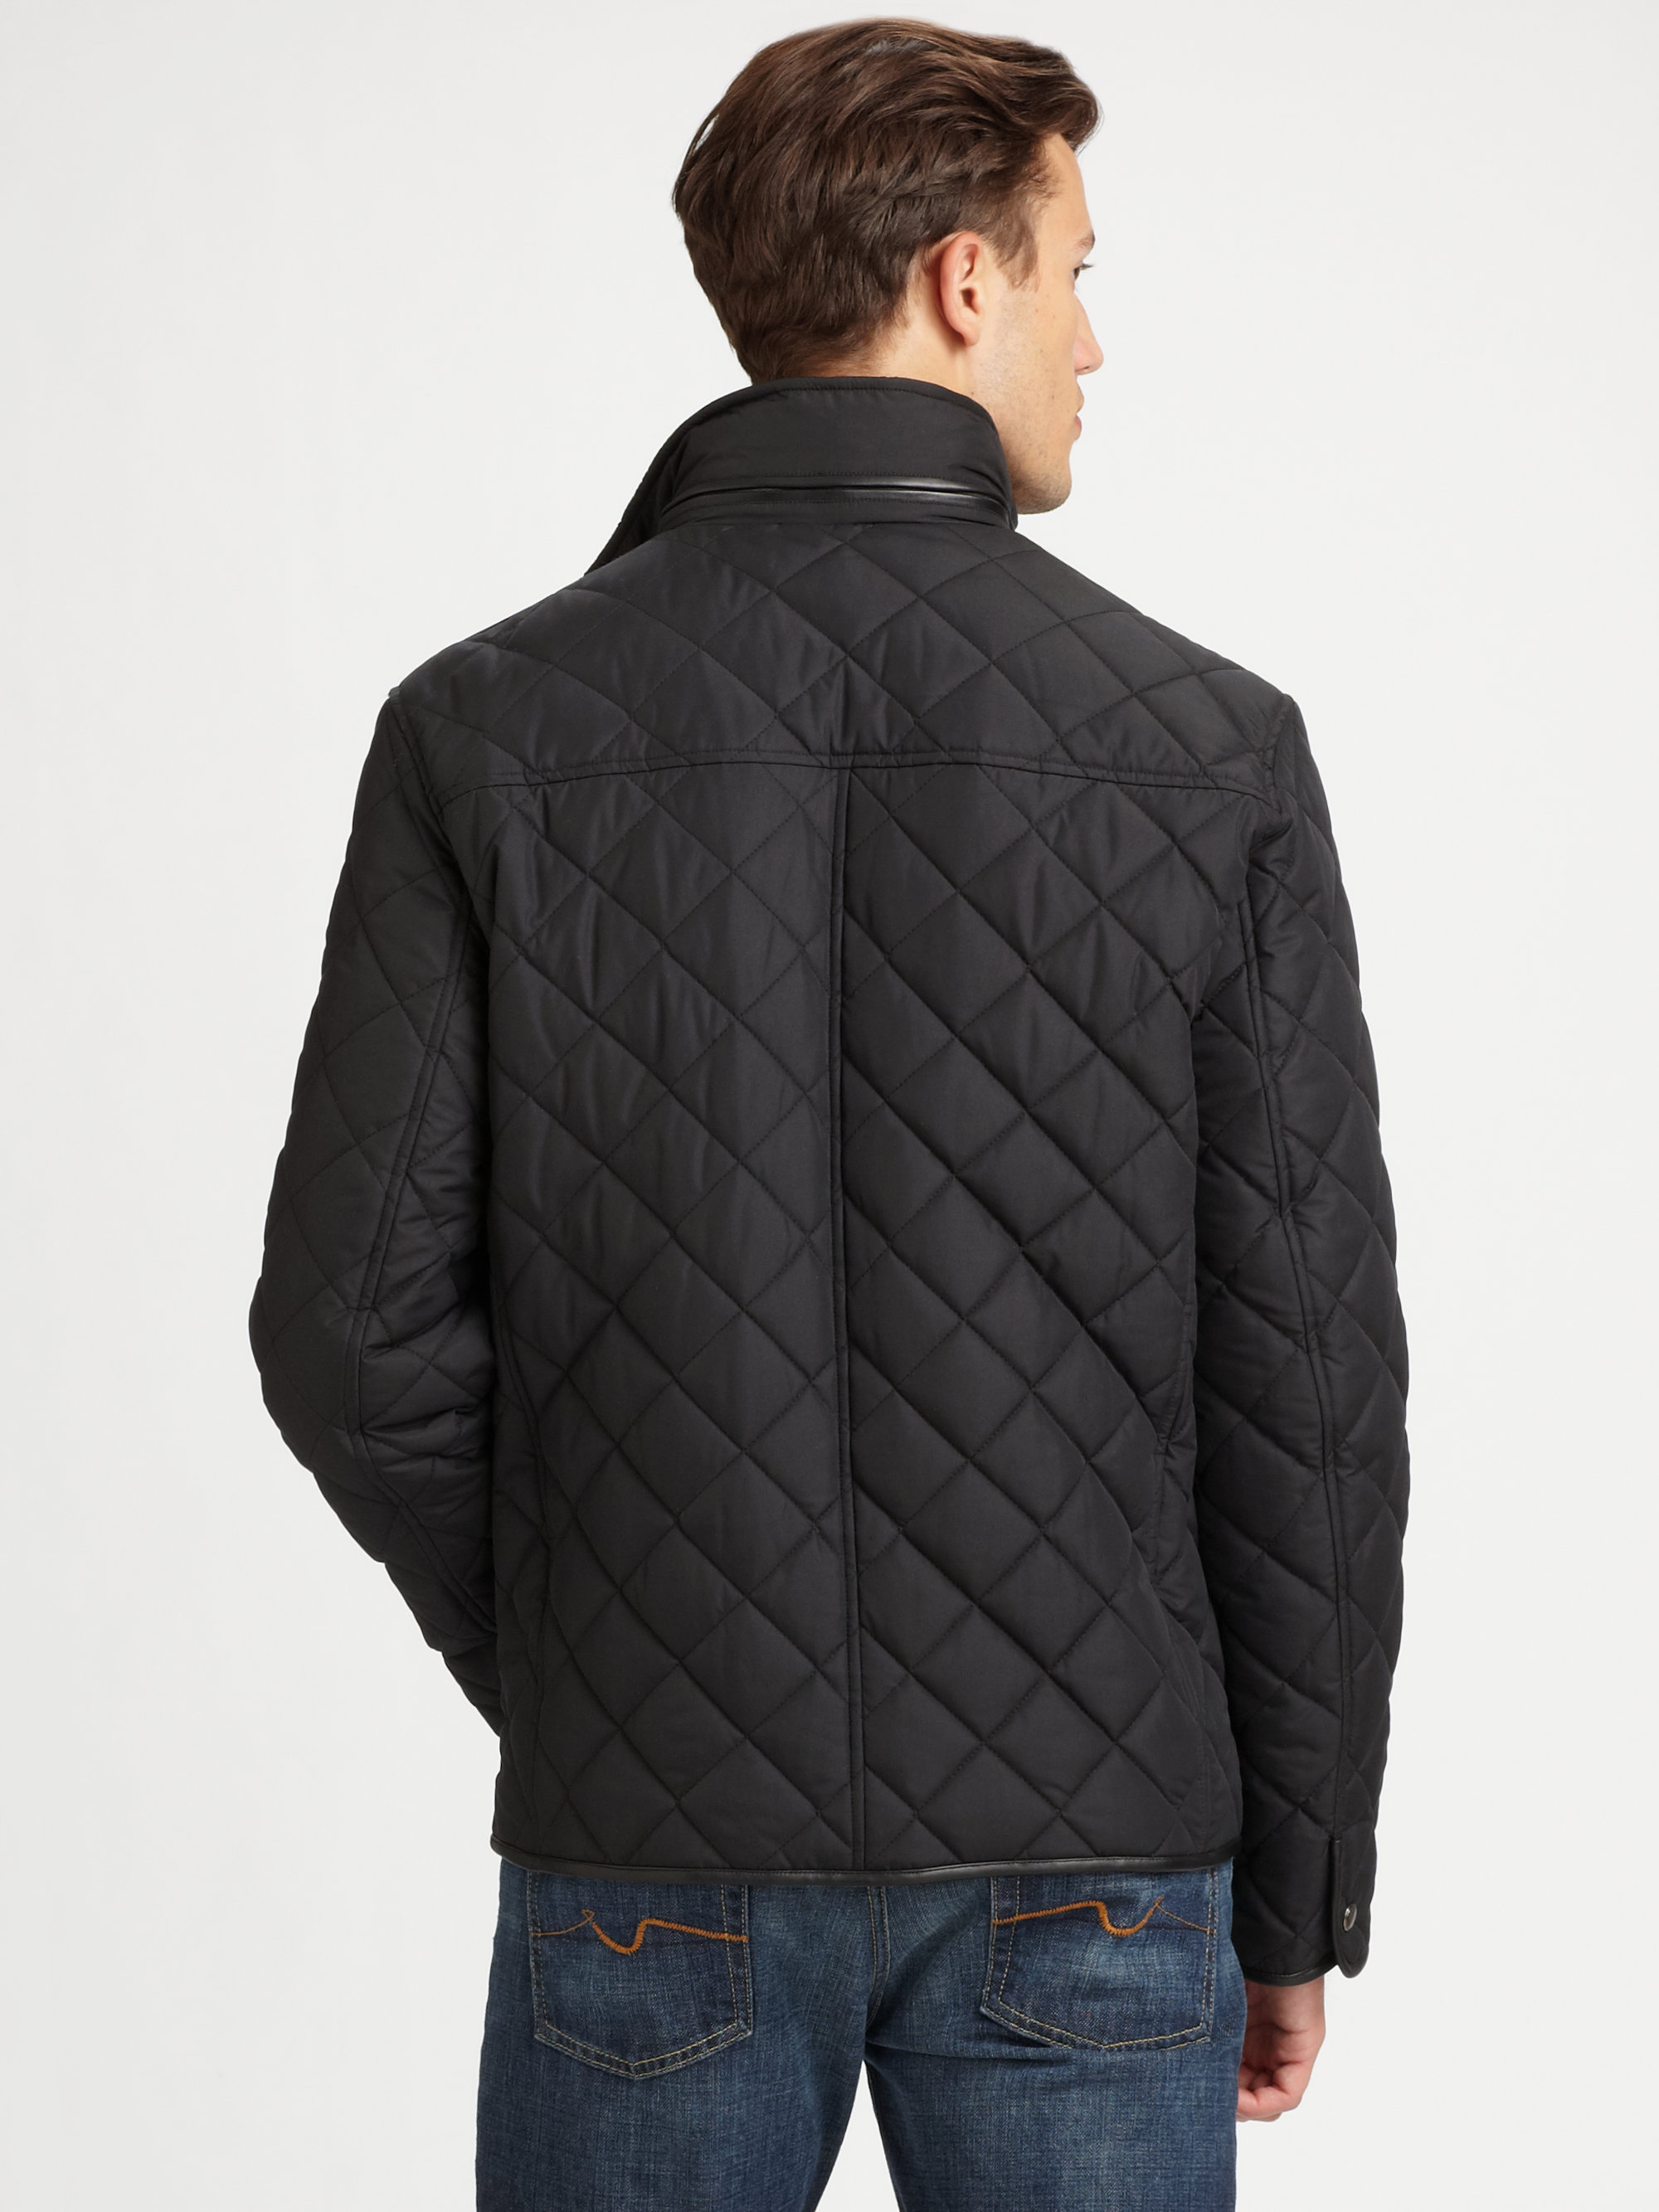 Cole Haan Quilted Jacket in Black for Men - Lyst